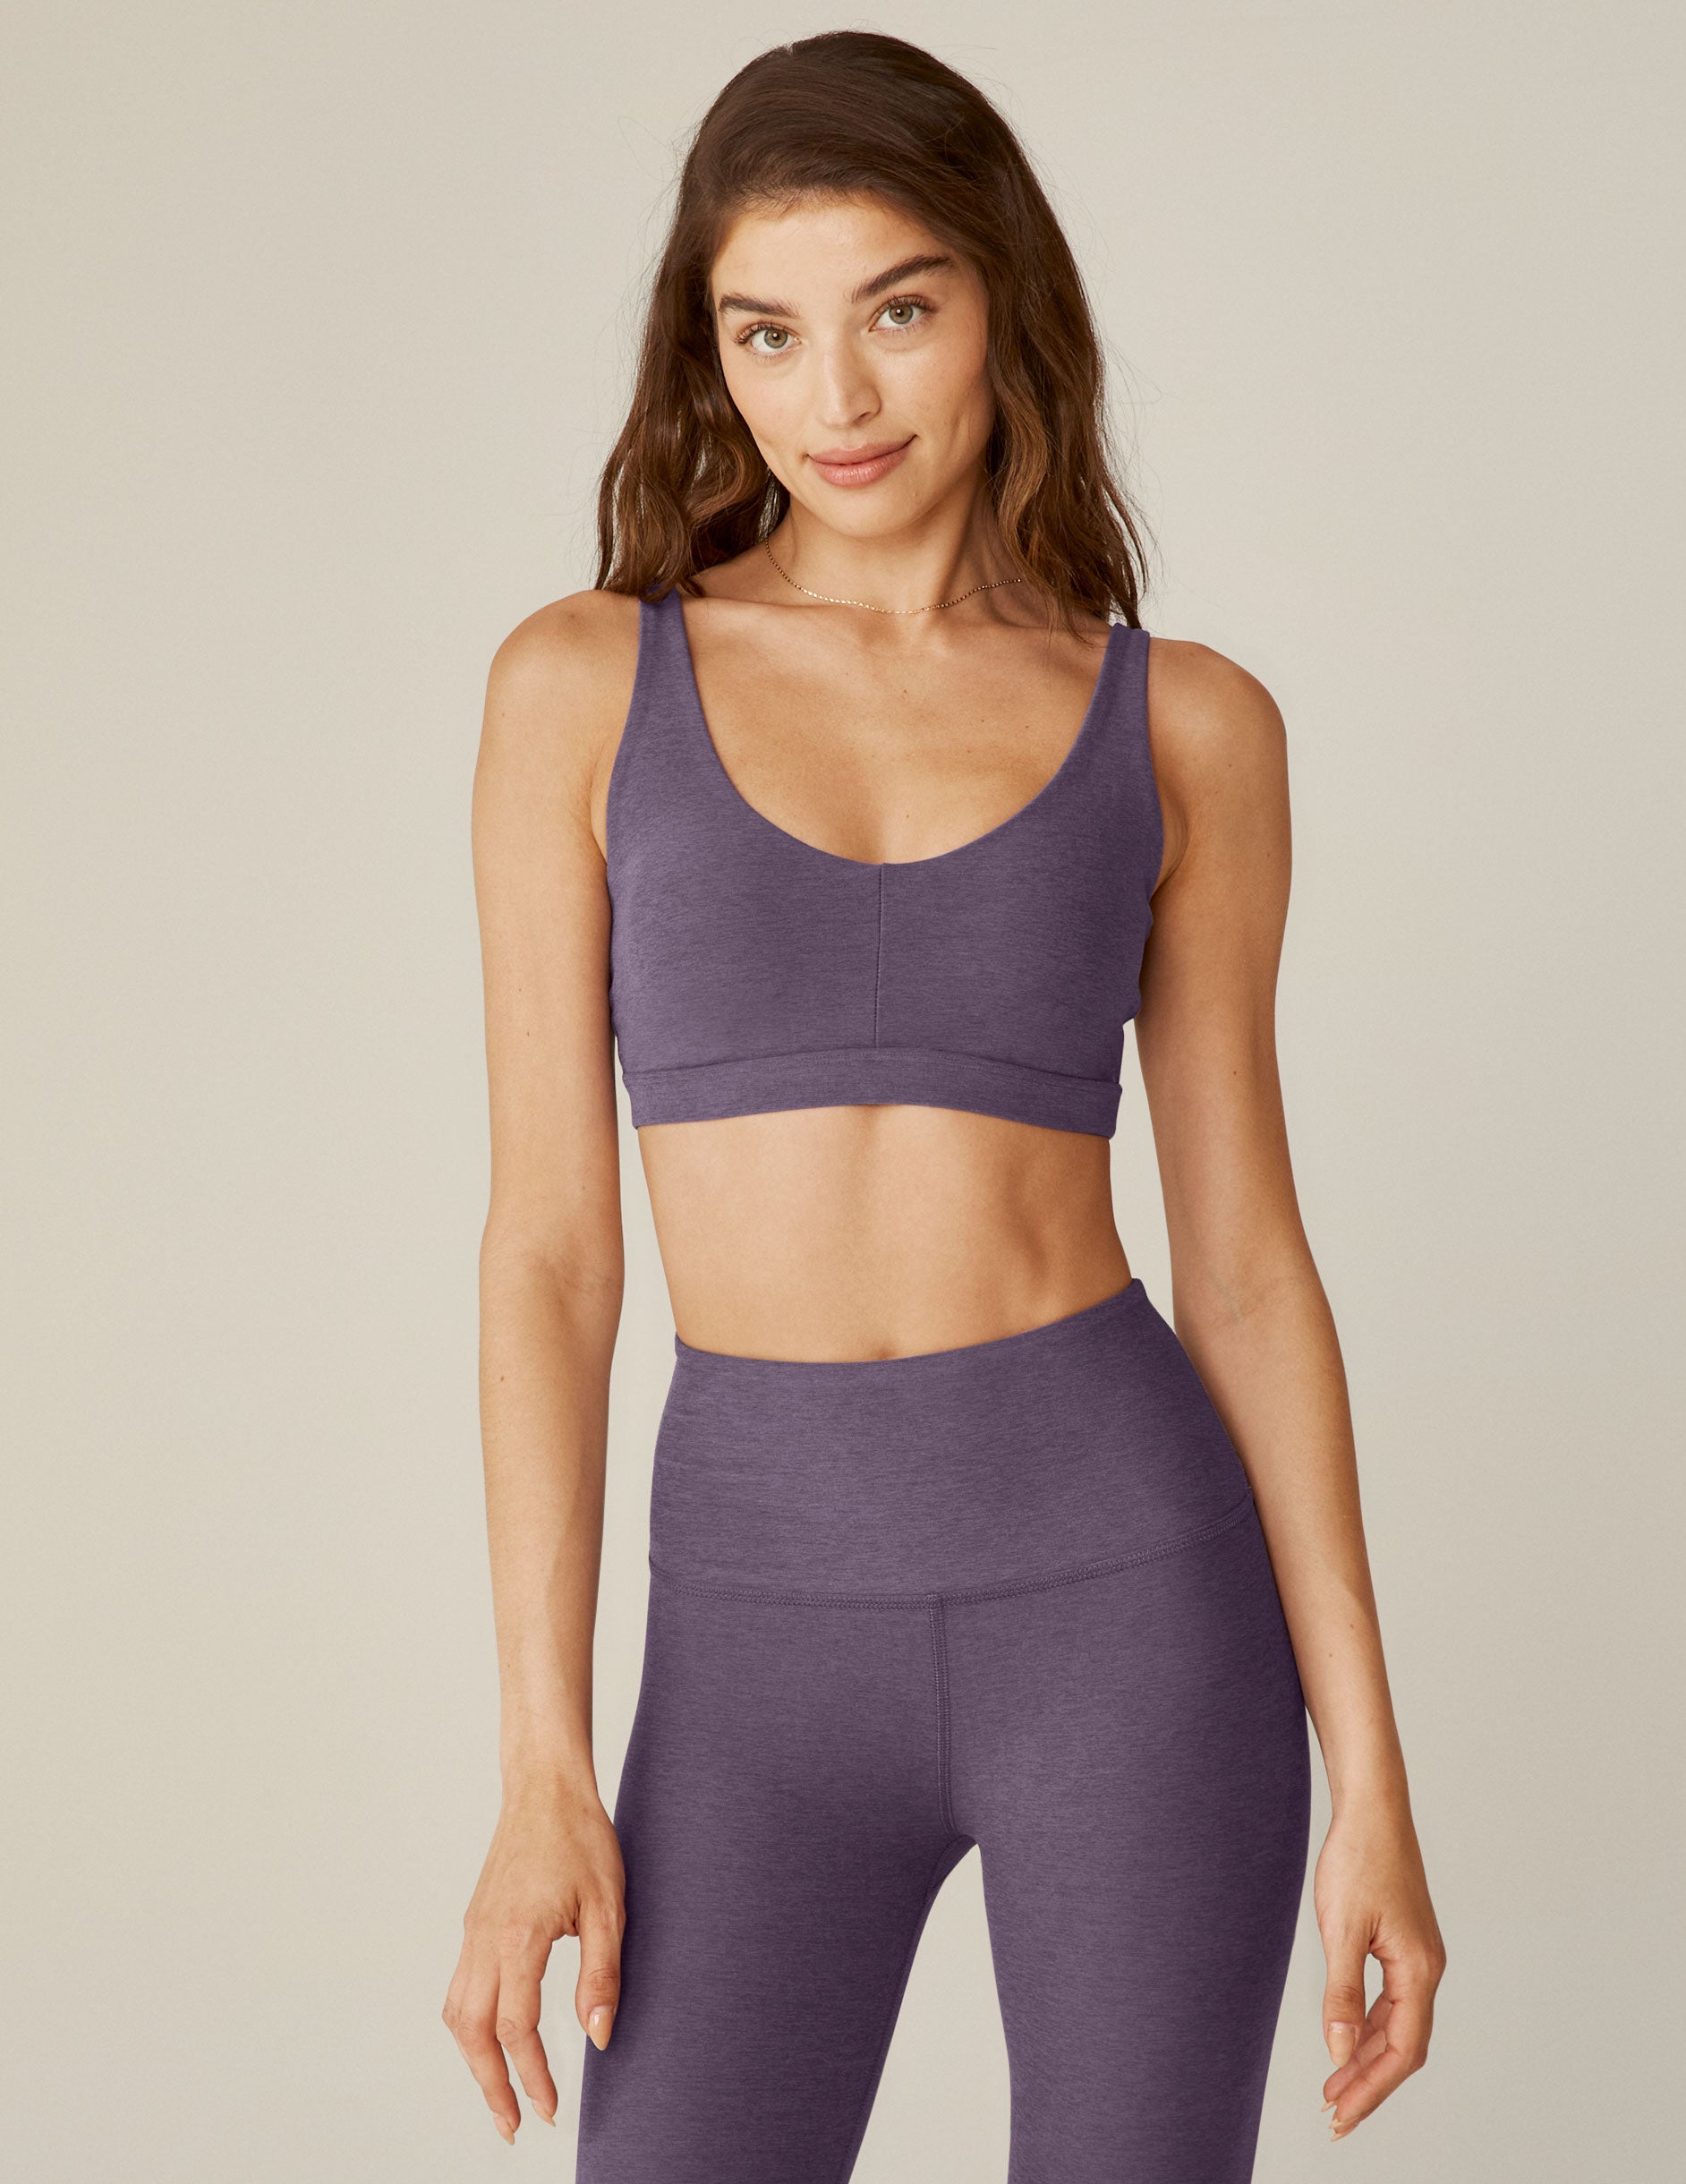 purple sports bra with remove-able pads and adjustable straps. 